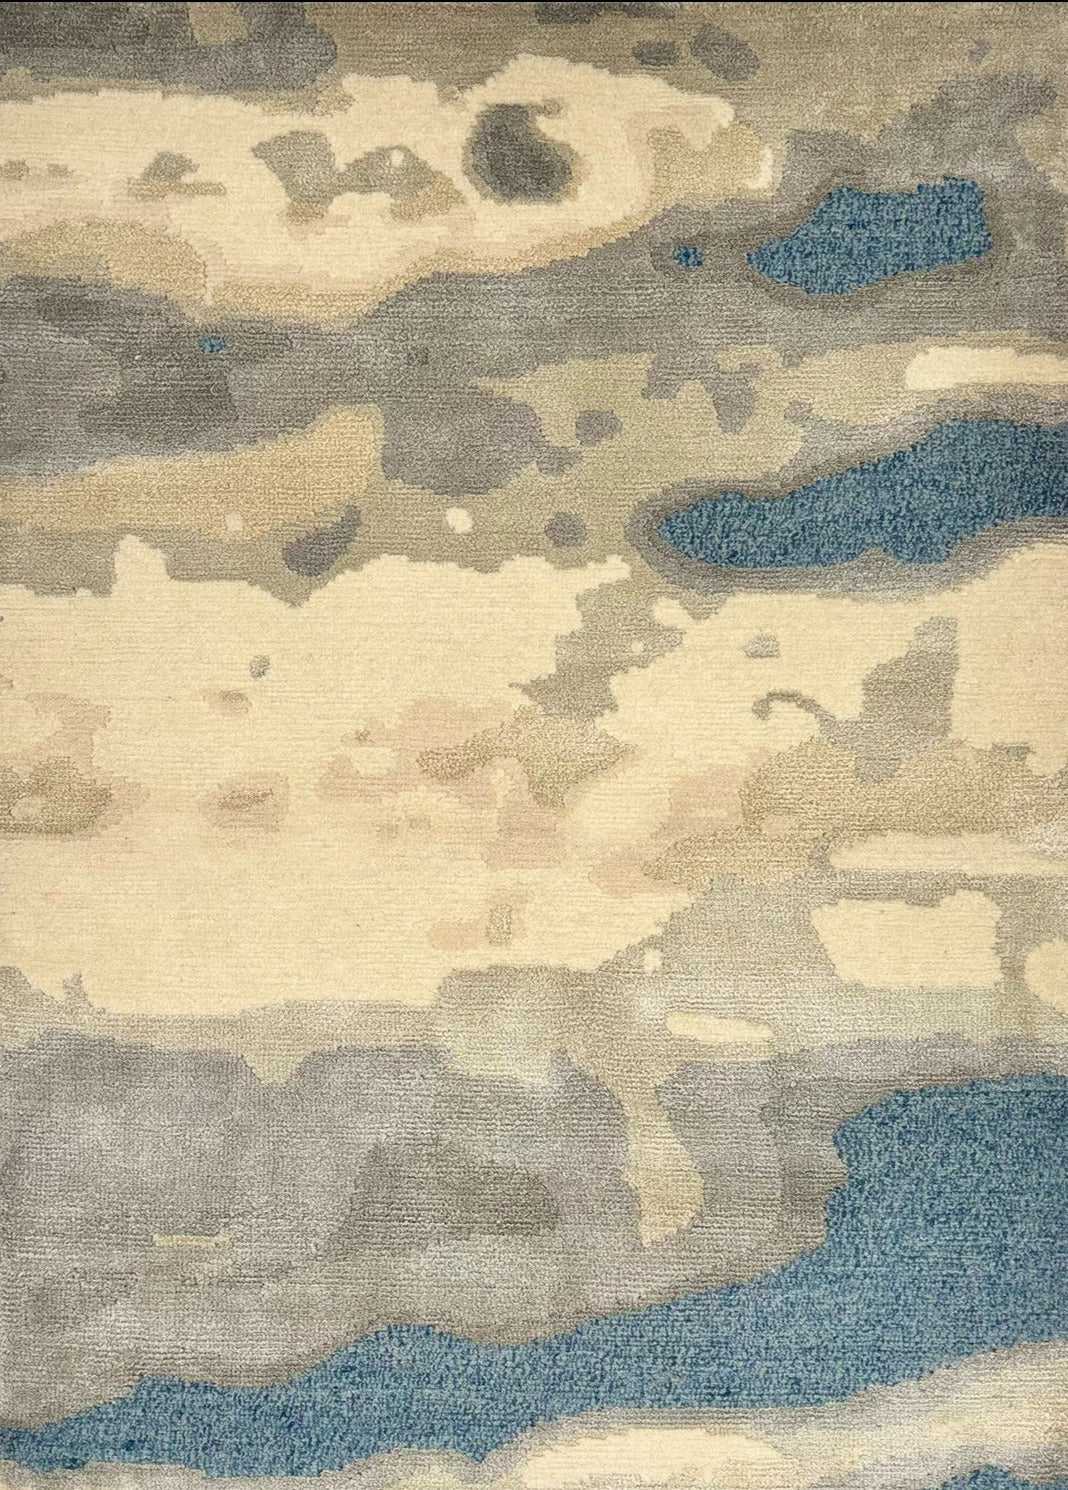 Detail of a woolblend rug in tan, cream and acqua in an abstract textural pattern.